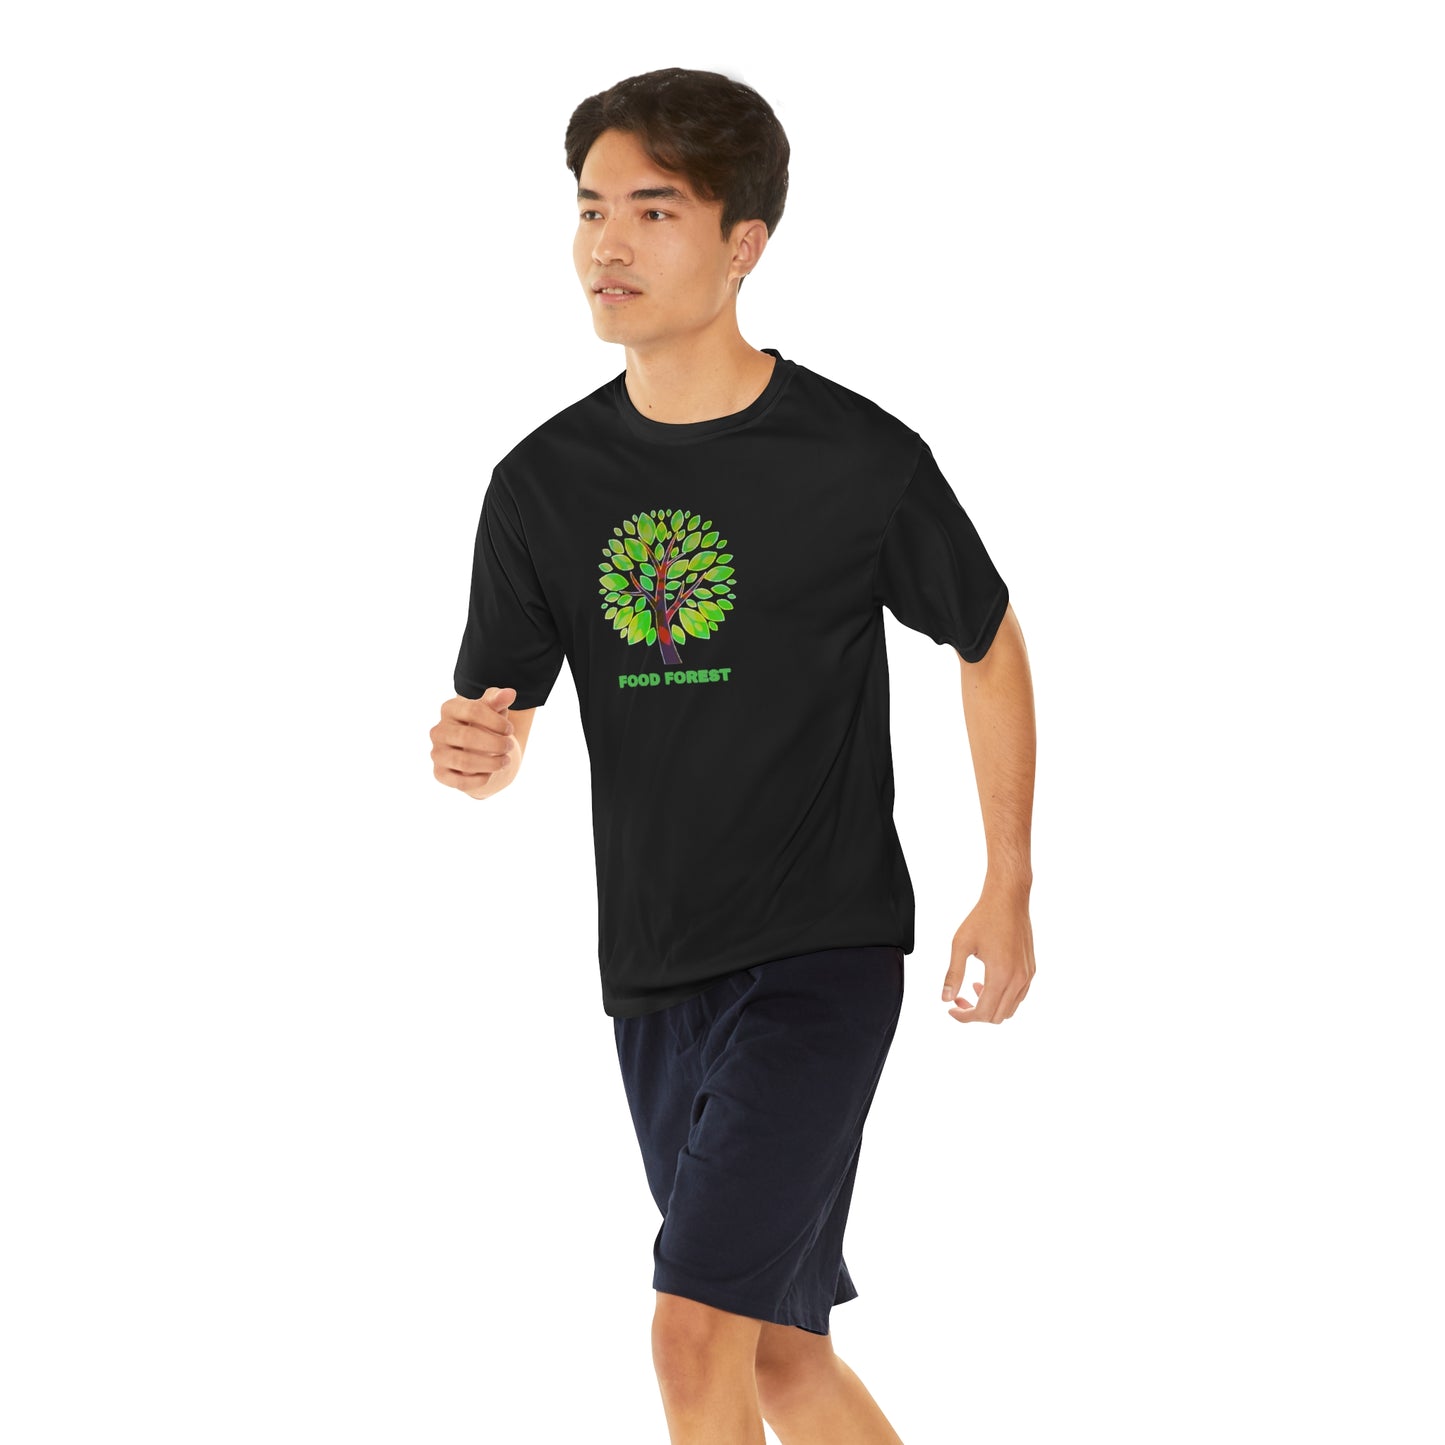 FOOD FOREST Men's Performance T-Shirt